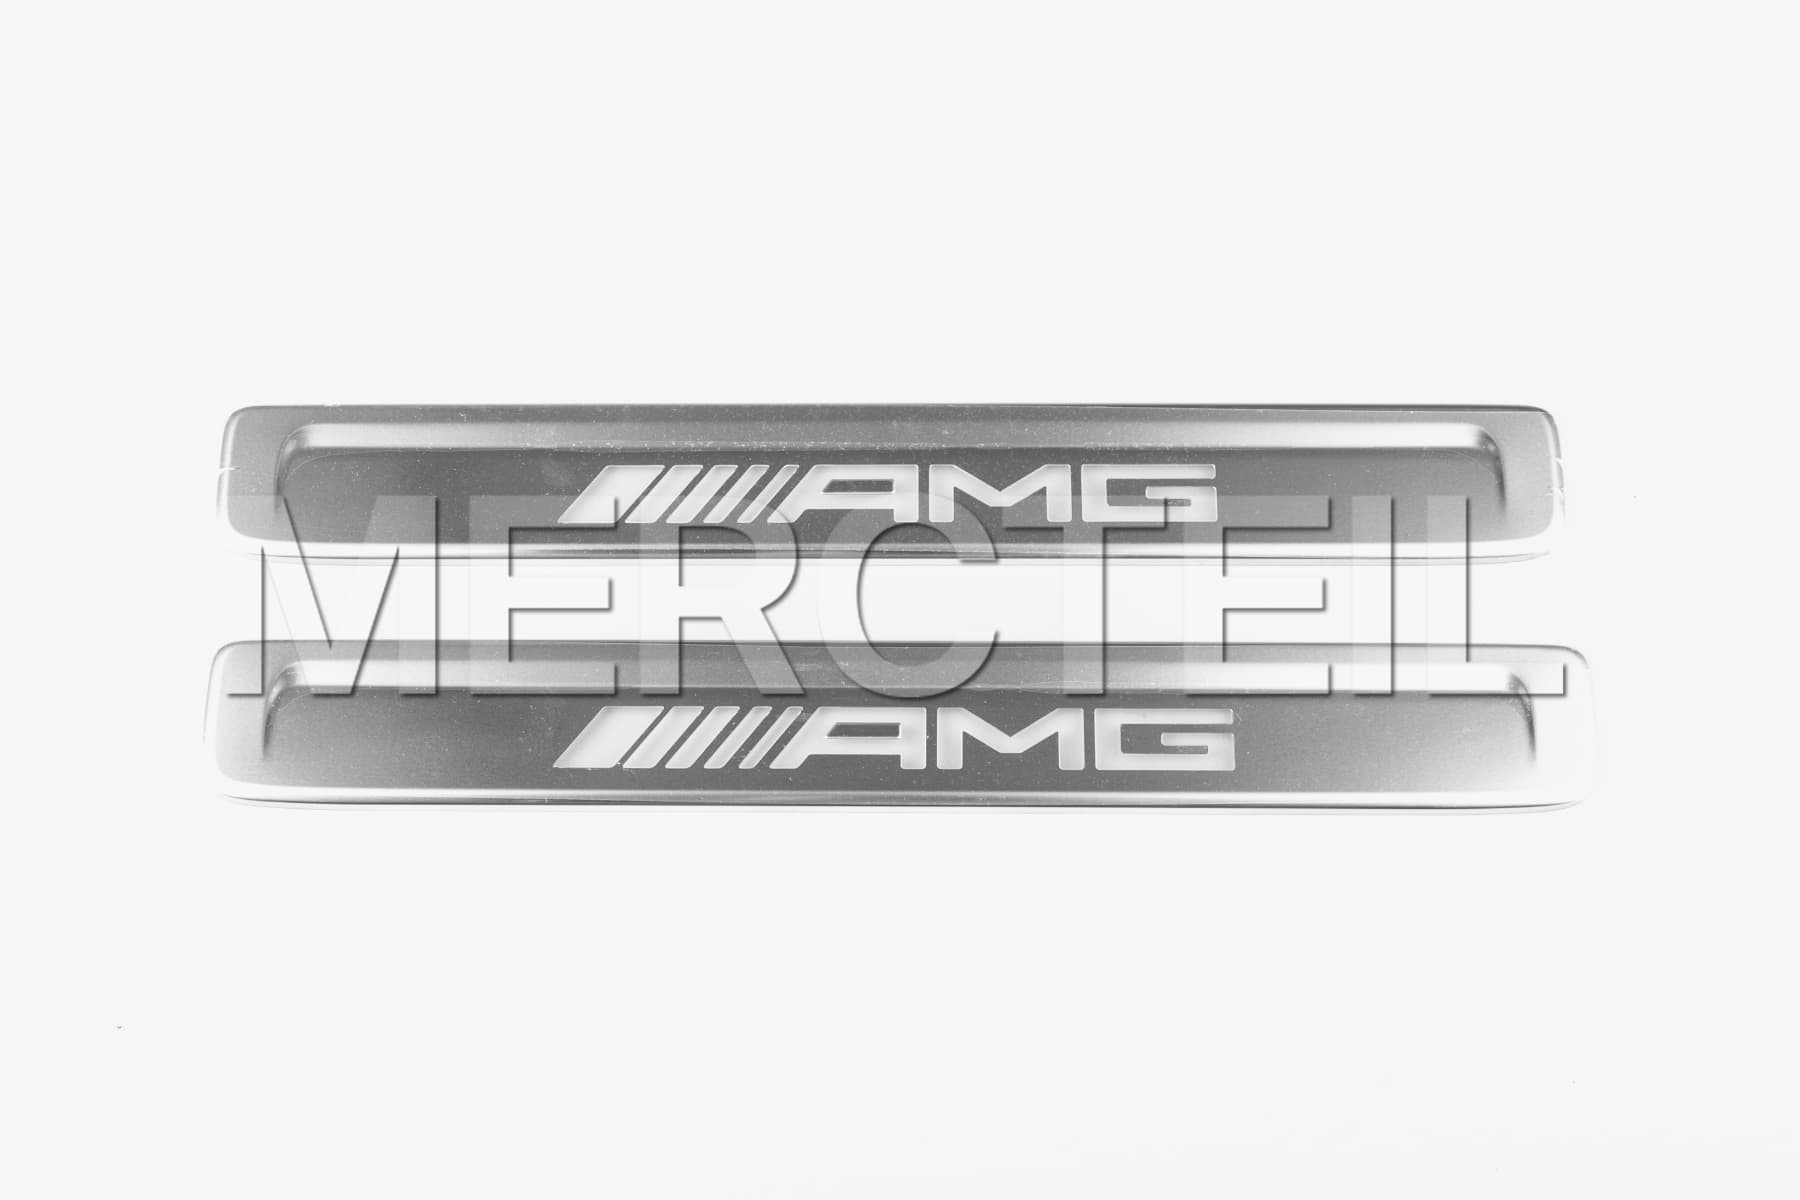 C-Class / GLC-Class AMG Exchangeable Covers for Illuminated Door Sills Code U45 206 254 Genuine Mercedes-AMG (Part number: A2066805305)